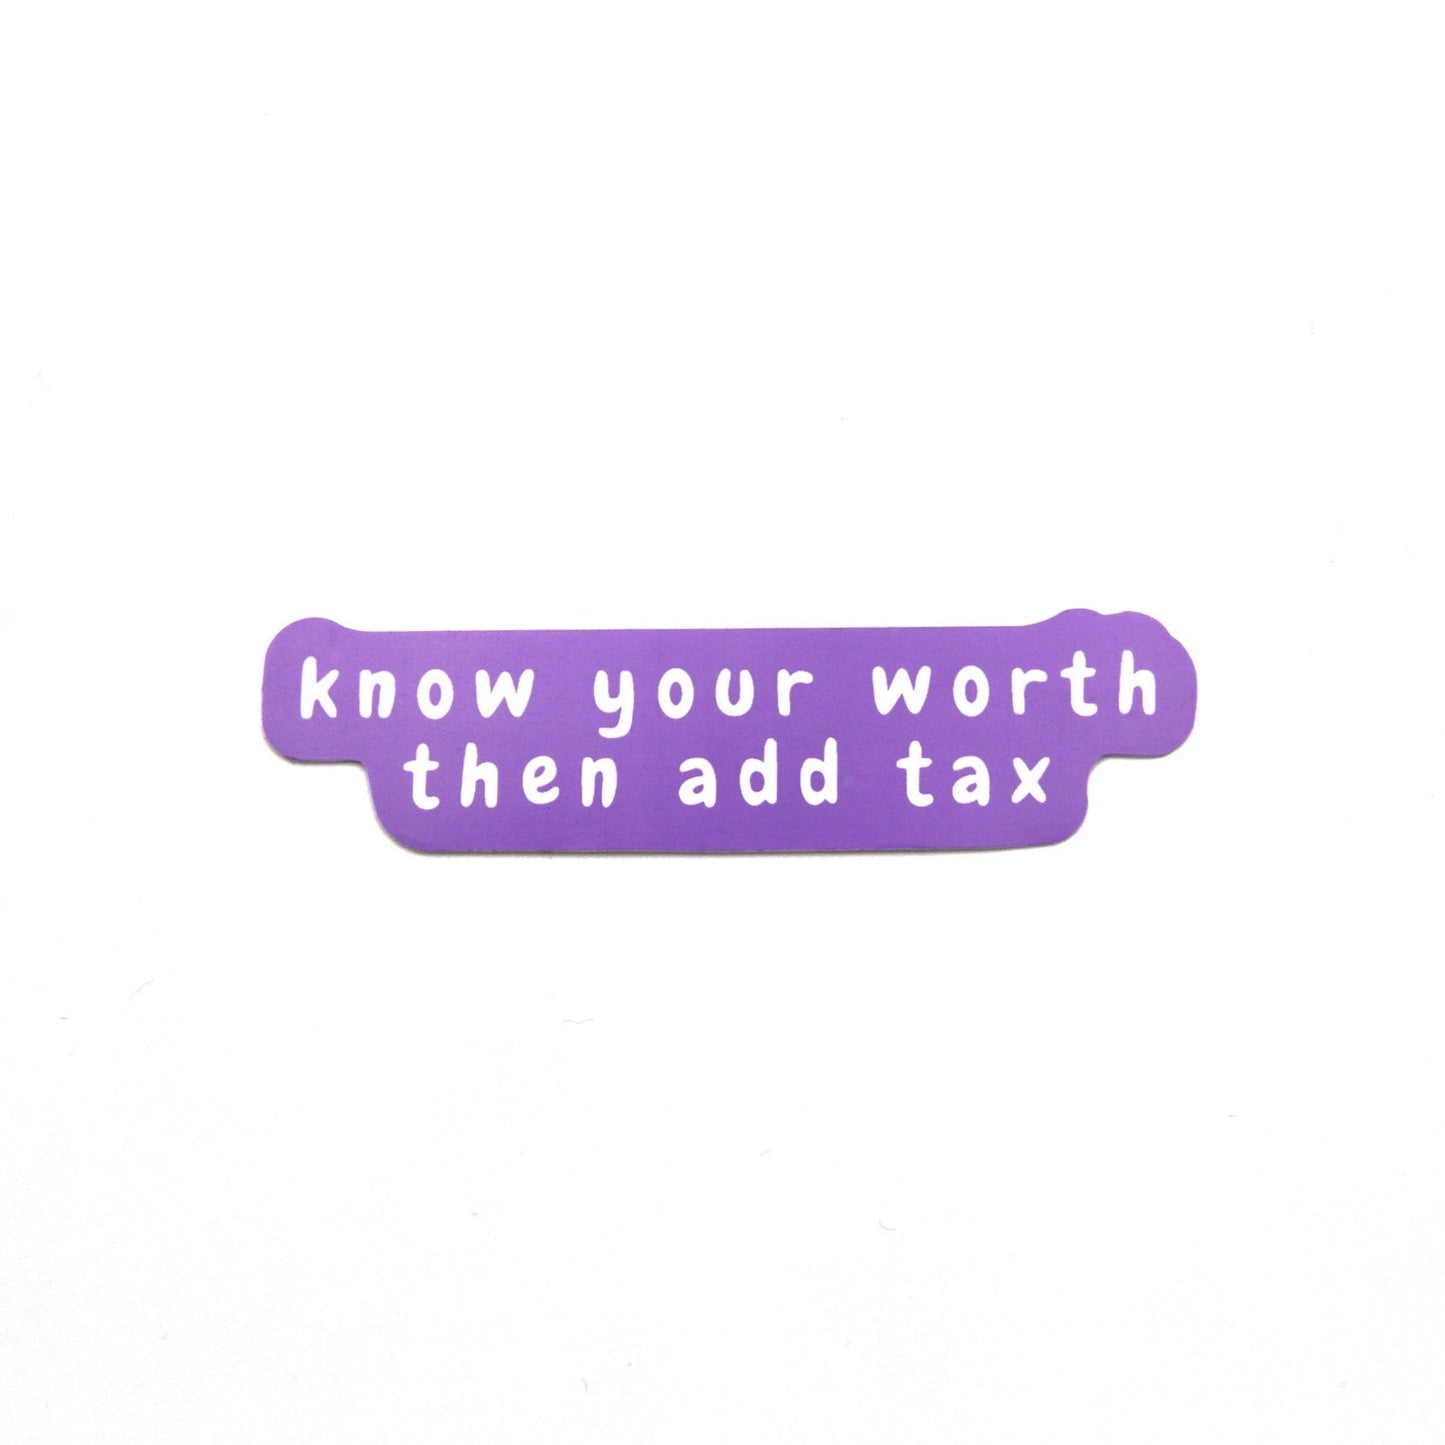 Know Your Worth Sticker Wear The Peace Stickers 0.5 inches x 3 inches